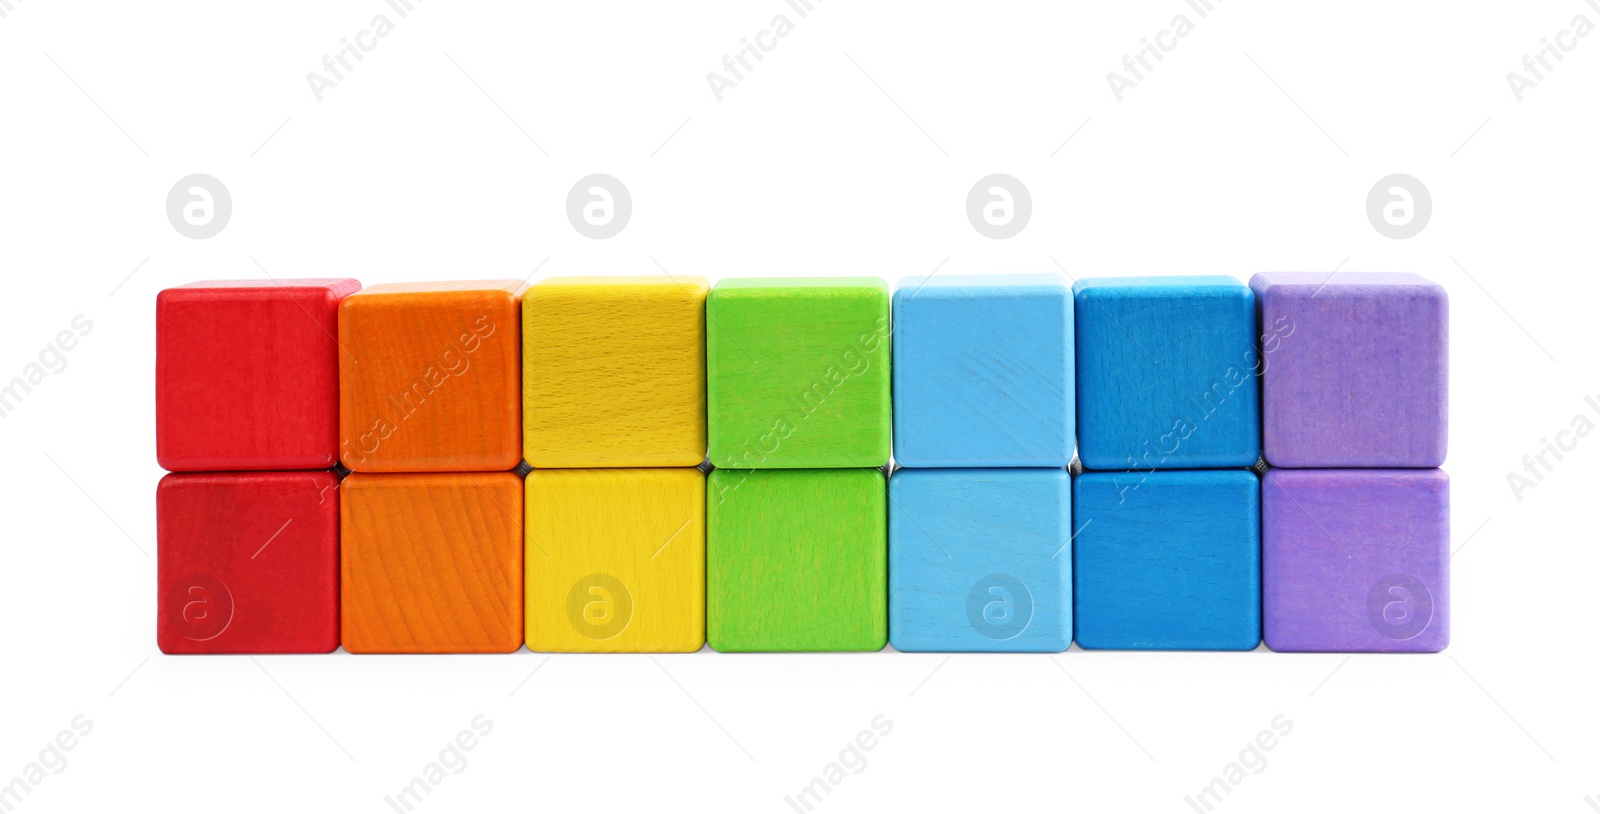 Photo of Many colorful cubes isolated on white. Children's toys